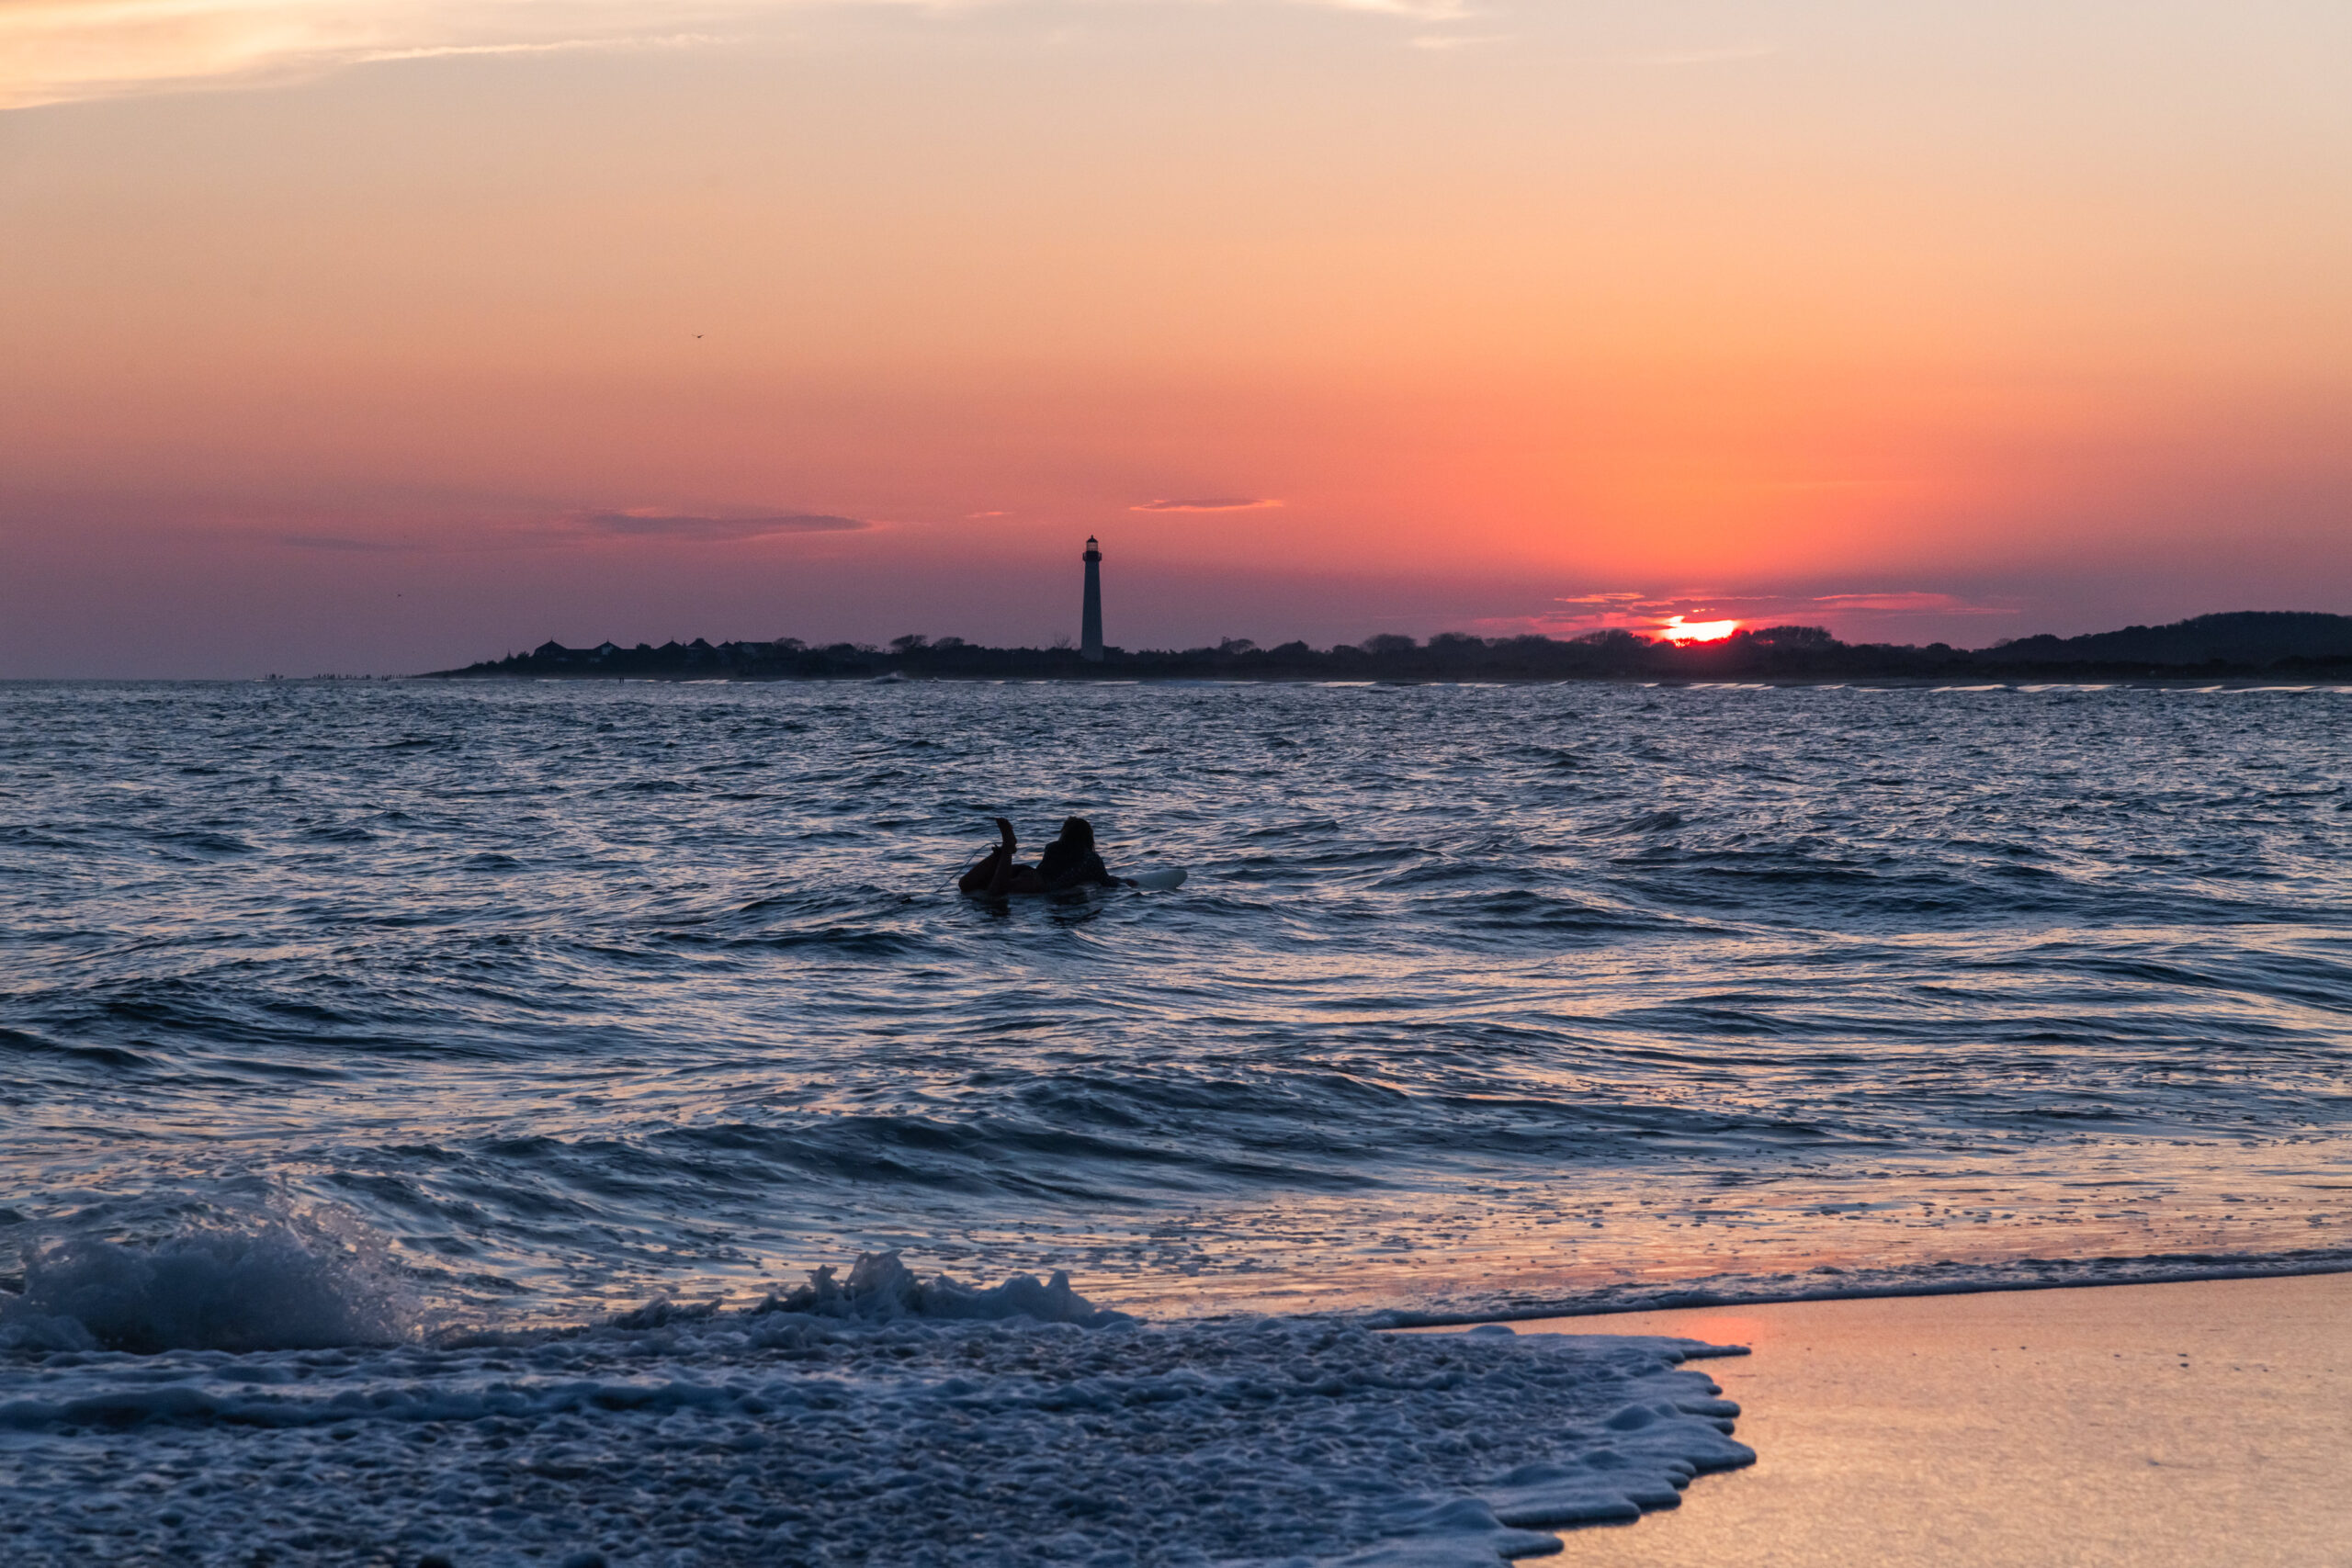 A person on a surfboard in the ocean watching the sunset by the Cape May Lighthouse with waves coming into the shore